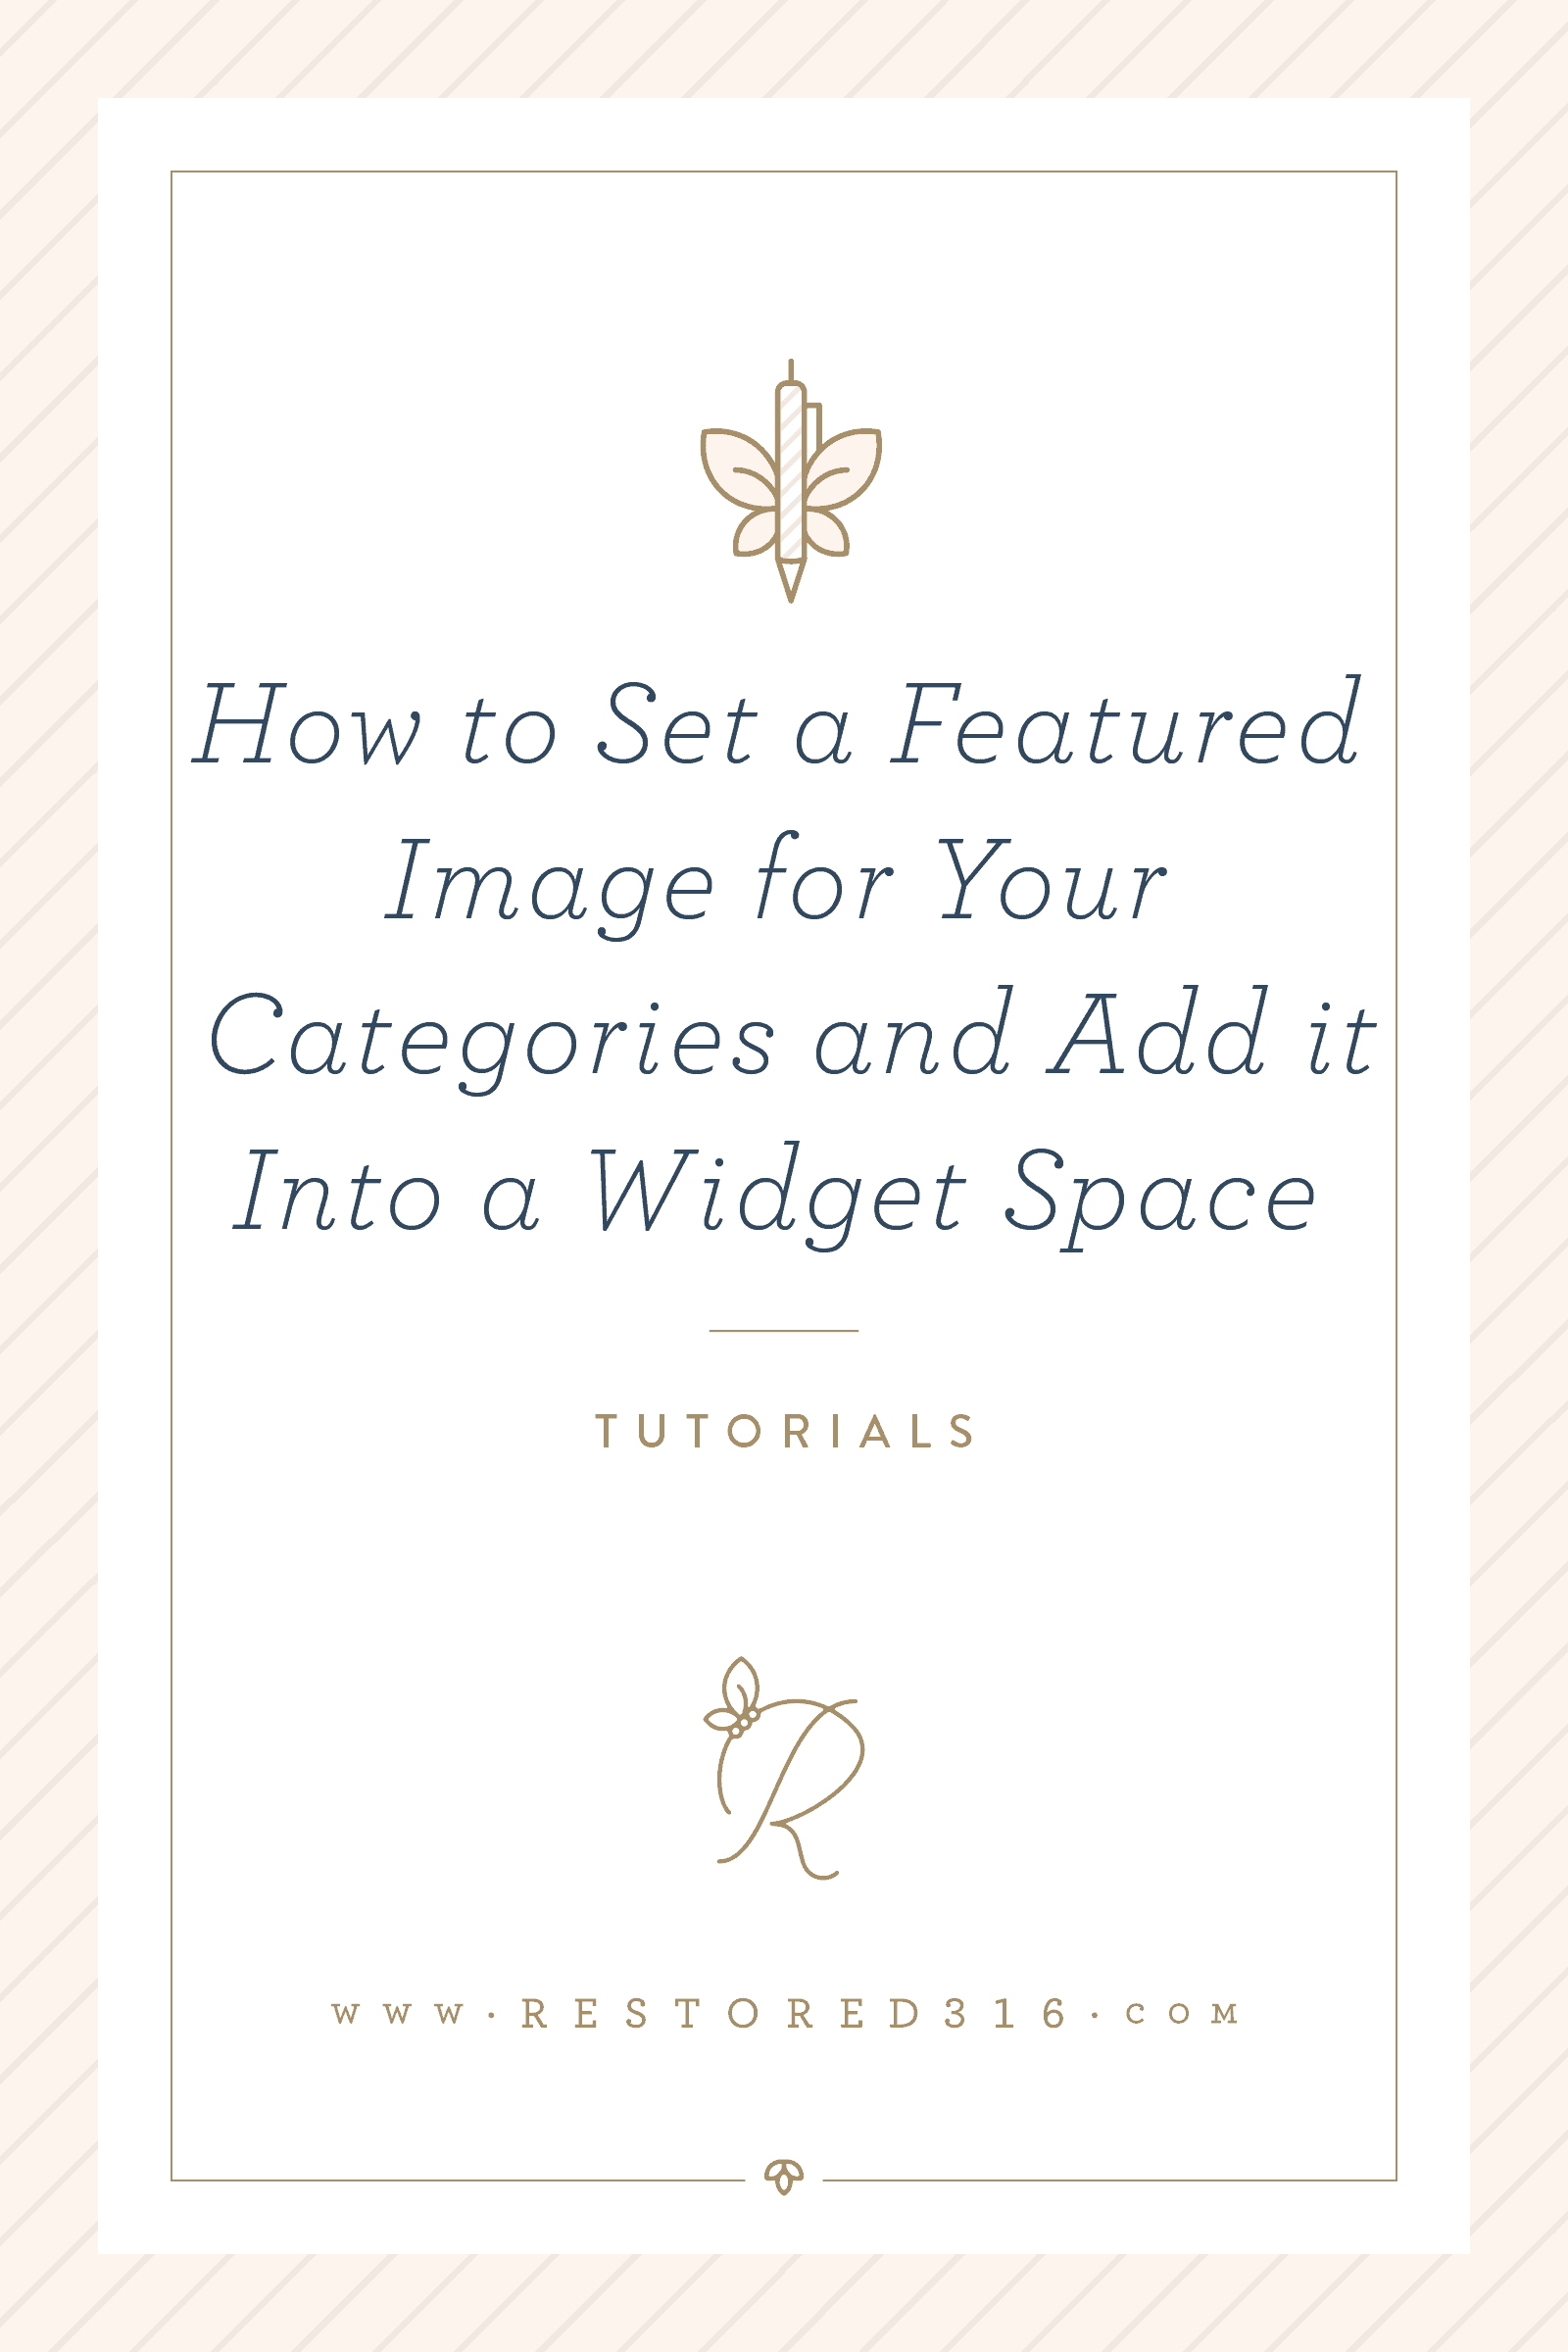 how-to-set-a-featured-image-for-your-categories-and-add-it-into-a-widget-space